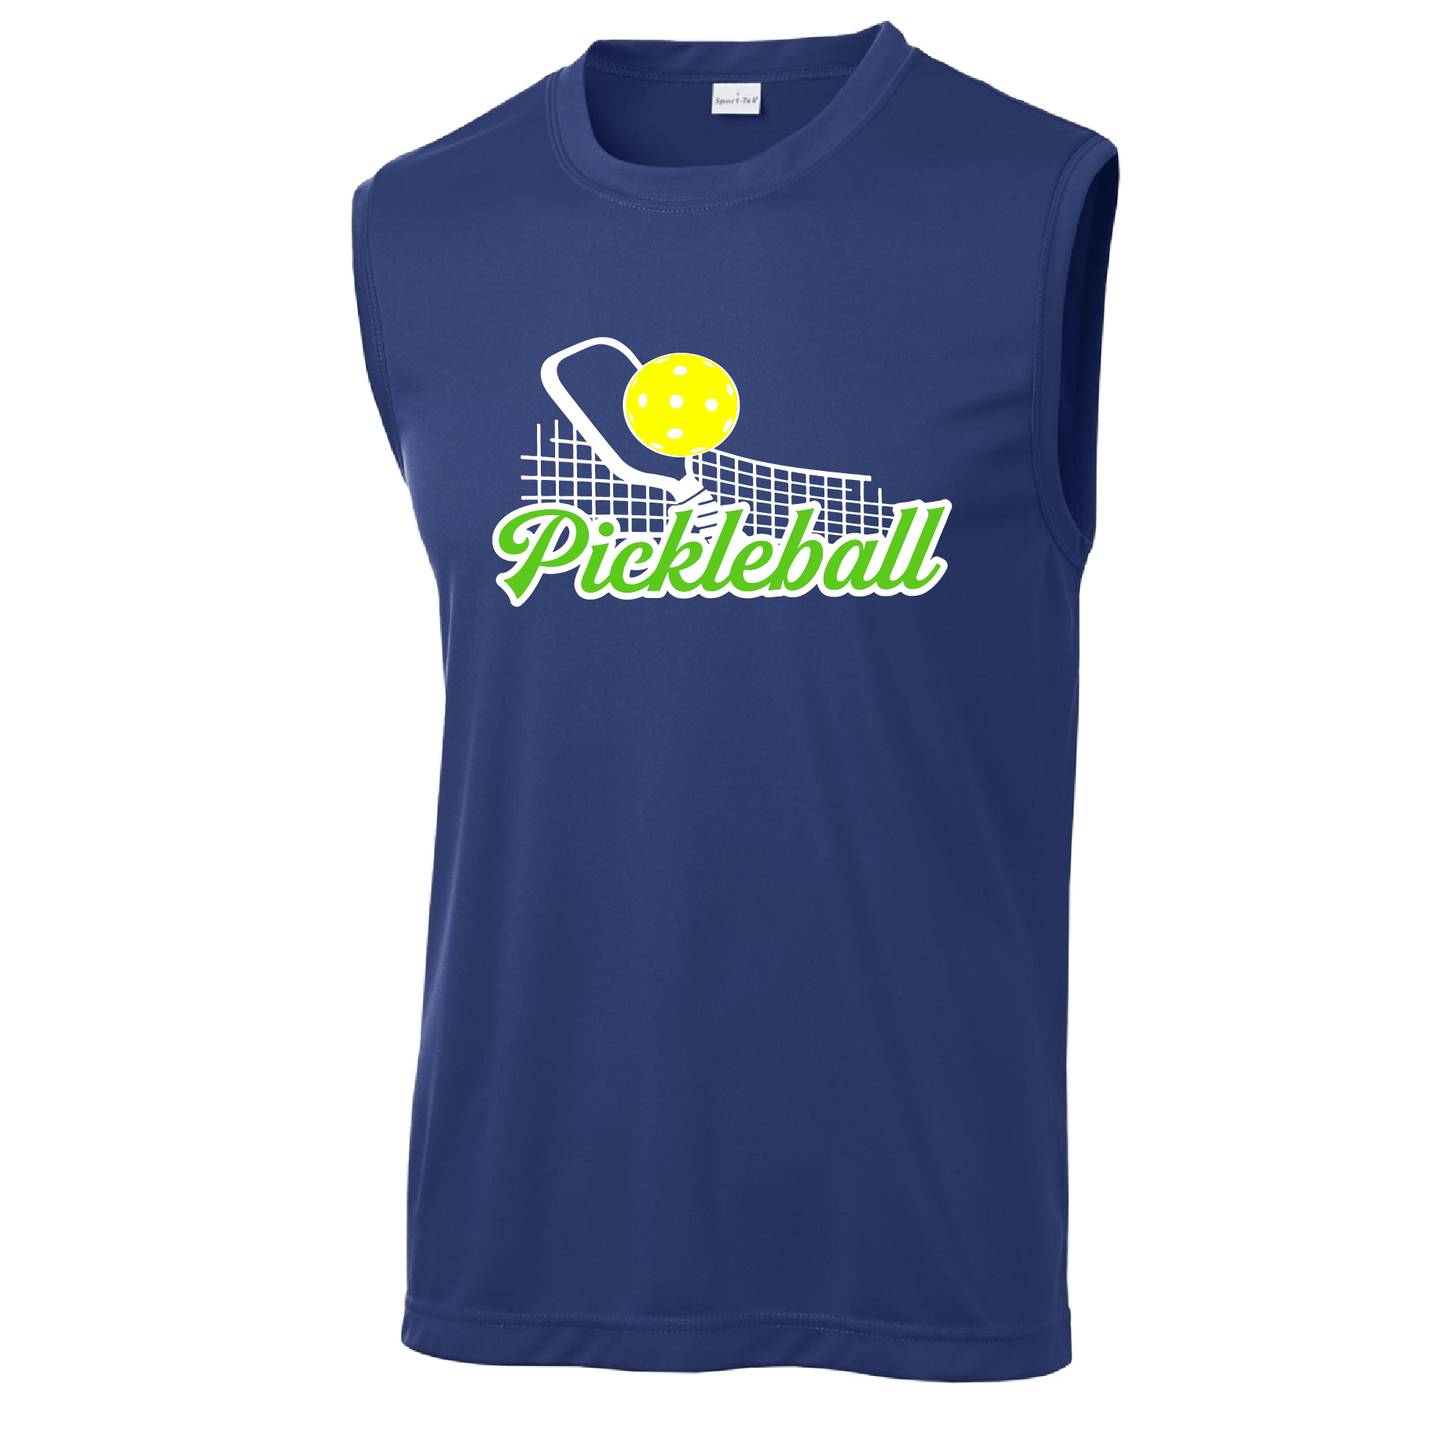 Pickleball Design: Pickleball Net  Men's Style: Sleeveless  Shirts are lightweight, roomy and highly breathable. These moisture-wicking shirts are designed for athletic performance. They feature PosiCharge technology to lock in color and prevent logos from fading. Removable tag and set-in sleeves for comfort.